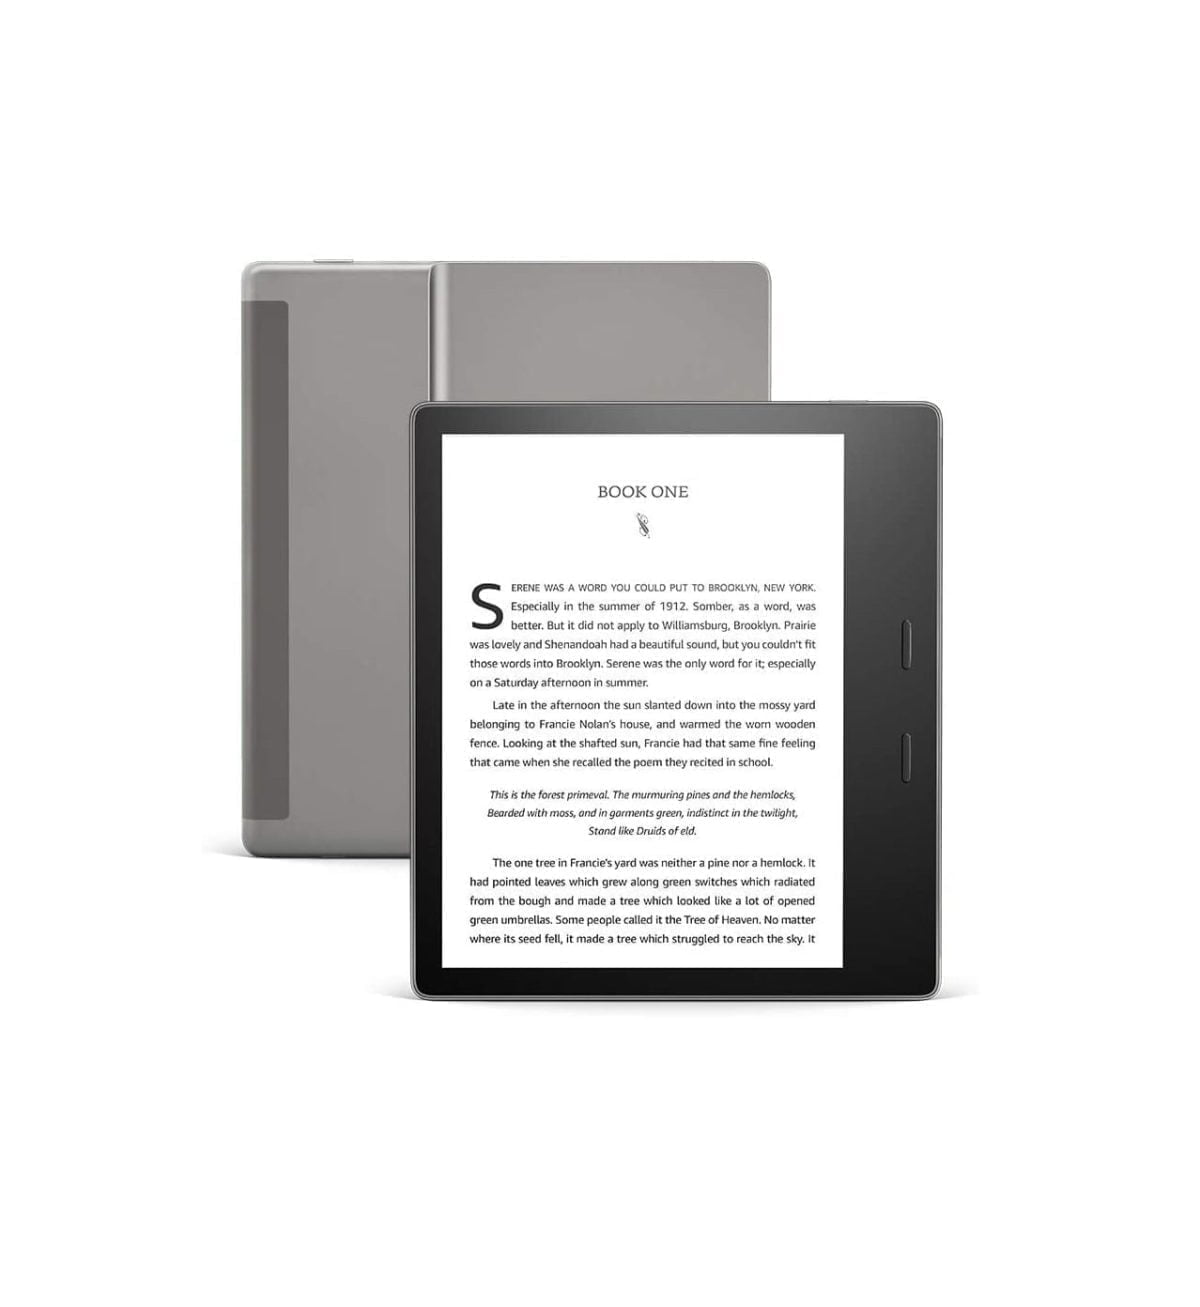 61Hhewtb Rl. Ac Sl1000 Amazon &Amp;Lt;H1&Amp;Gt;All-New Kindle Oasis (10Th Gen), Now With Adjustable Warm Light, 7&Amp;Quot; Display, Waterproof, 8 Gb, Wi-Fi, Graphite&Amp;Lt;/H1&Amp;Gt; &Amp;Lt;Ul Class=&Amp;Quot;A-Unordered-List A-Vertical A-Spacing-Mini&Amp;Quot;&Amp;Gt; &Amp;Lt;Li&Amp;Gt;&Amp;Lt;Span Class=&Amp;Quot;A-List-Item&Amp;Quot;&Amp;Gt;Amazon Largest, Highest Resolution Display— 7” And 300 Ppi, Glare-Free.&Amp;Lt;/Span&Amp;Gt;&Amp;Lt;/Li&Amp;Gt; &Amp;Lt;Li&Amp;Gt;&Amp;Lt;Span Class=&Amp;Quot;A-List-Item&Amp;Quot;&Amp;Gt;Adjustable Warm Light To Shift Screen Shade From White To Amber.&Amp;Lt;/Span&Amp;Gt;&Amp;Lt;/Li&Amp;Gt; &Amp;Lt;Li&Amp;Gt;&Amp;Lt;Span Class=&Amp;Quot;A-List-Item&Amp;Quot;&Amp;Gt;Waterproof (Ipx8) So You Can Read In The Bath Or By The Pool.&Amp;Lt;/Span&Amp;Gt;&Amp;Lt;/Li&Amp;Gt; &Amp;Lt;Li&Amp;Gt;&Amp;Lt;Span Class=&Amp;Quot;A-List-Item&Amp;Quot;&Amp;Gt;Thin And Light Ergonomic Design With Dedicated Page Turn Buttons.&Amp;Lt;/Span&Amp;Gt;&Amp;Lt;/Li&Amp;Gt; &Amp;Lt;Li&Amp;Gt;&Amp;Lt;Span Class=&Amp;Quot;A-List-Item&Amp;Quot;&Amp;Gt;Reads Like Real Paper With The Latest E-Ink Technology For Fast Page Turns.&Amp;Lt;/Span&Amp;Gt;&Amp;Lt;/Li&Amp;Gt; &Amp;Lt;Li&Amp;Gt;&Amp;Lt;Span Class=&Amp;Quot;A-List-Item&Amp;Quot;&Amp;Gt;Keep Reading - A Single Charge Lasts Weeks, Not Hours.&Amp;Lt;/Span&Amp;Gt;&Amp;Lt;/Li&Amp;Gt; &Amp;Lt;Li&Amp;Gt;&Amp;Lt;Span Class=&Amp;Quot;A-List-Item&Amp;Quot;&Amp;Gt;Browse Over 1 Million Ebooks In The Kindle Store On Amazon Us, Including Thousands Of Arabic Titles.&Amp;Lt;/Span&Amp;Gt;&Amp;Lt;/Li&Amp;Gt; &Amp;Lt;/Ul&Amp;Gt; All-New Kindle Oasis (10Th Gen), Now With Adjustable Warm Light, 7&Amp;Quot; Display, Waterproof, 8 Gb, Wi-Fi, Graphite